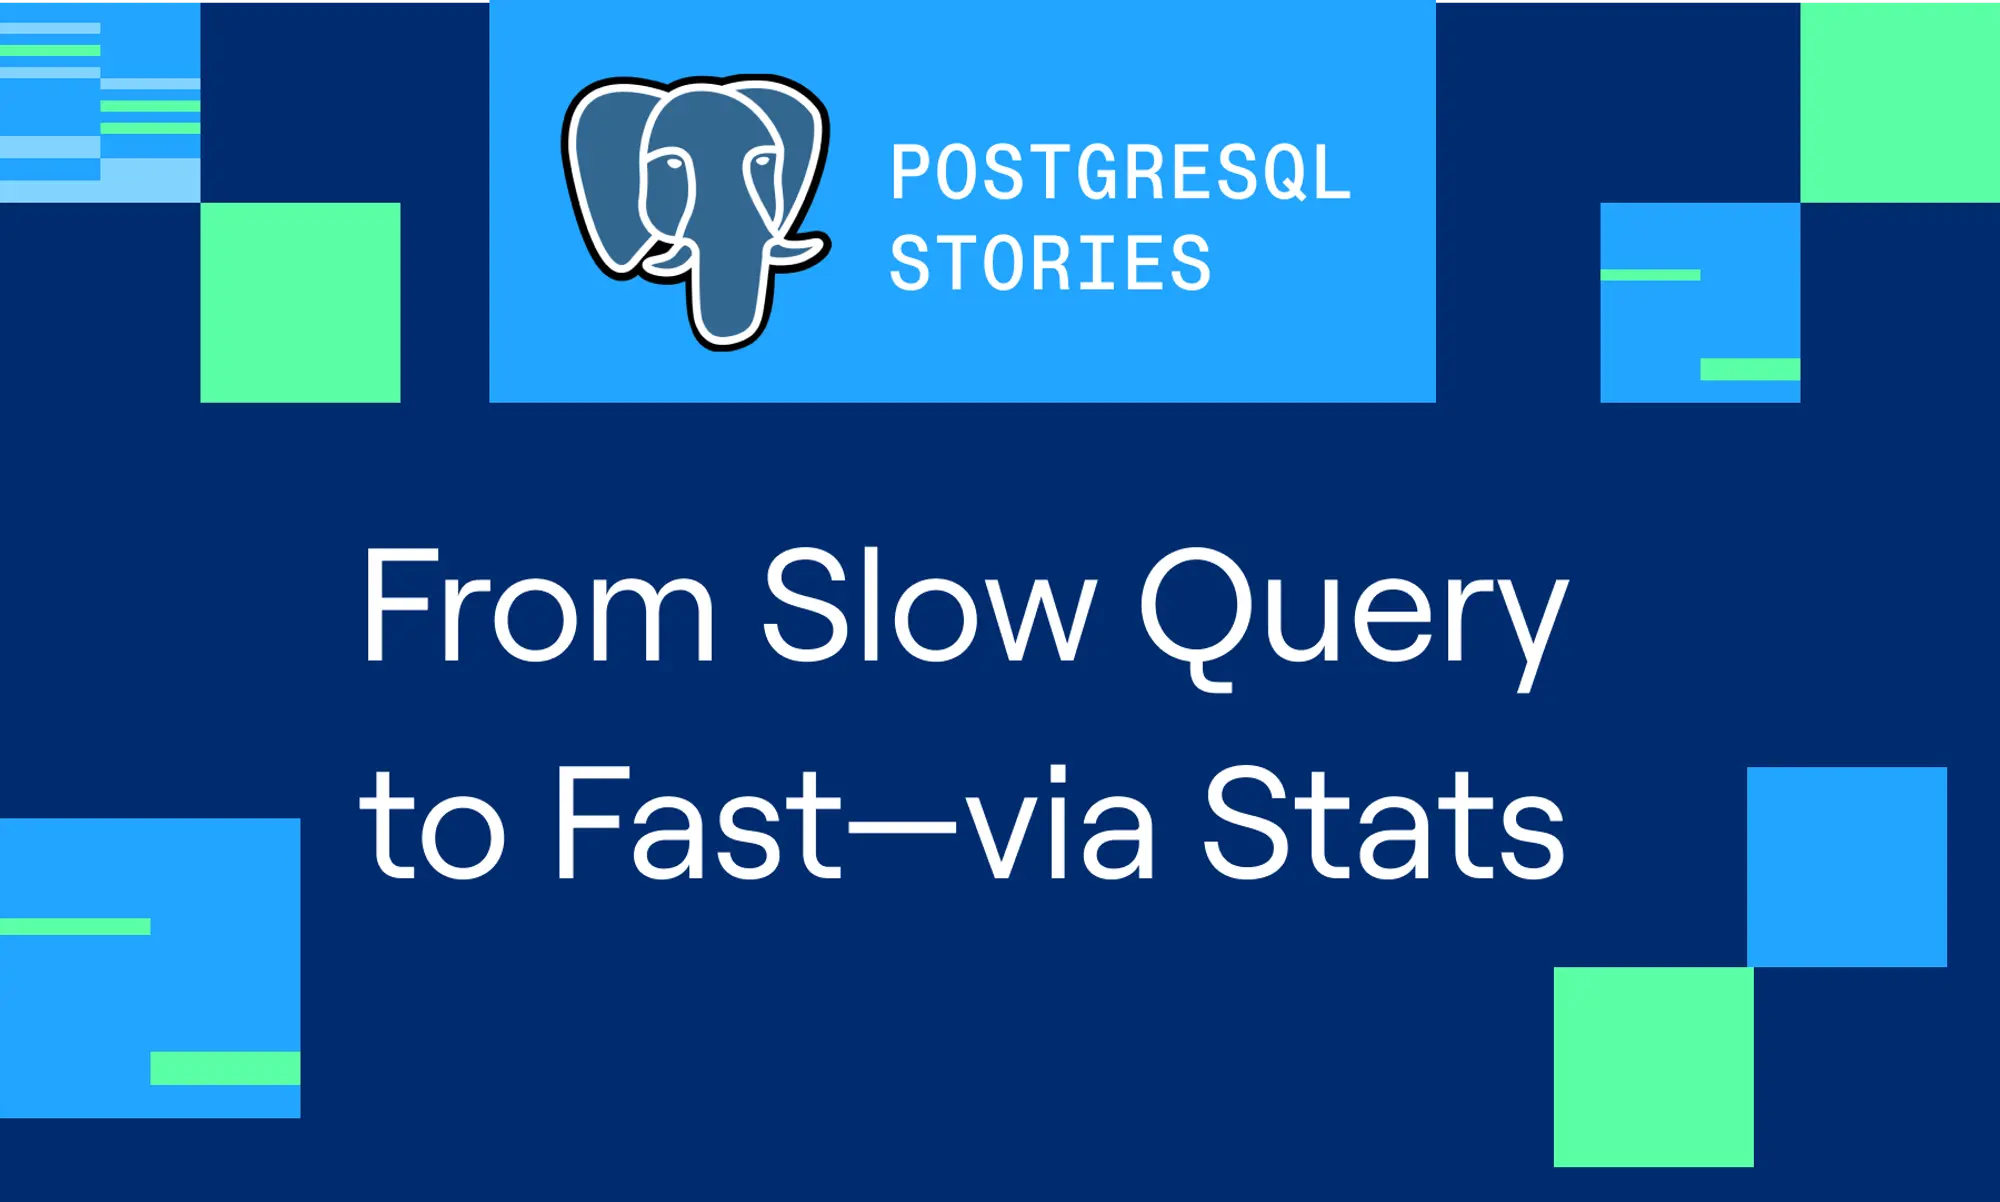 PostgreSQL Stories: From slow query to fast—via stats